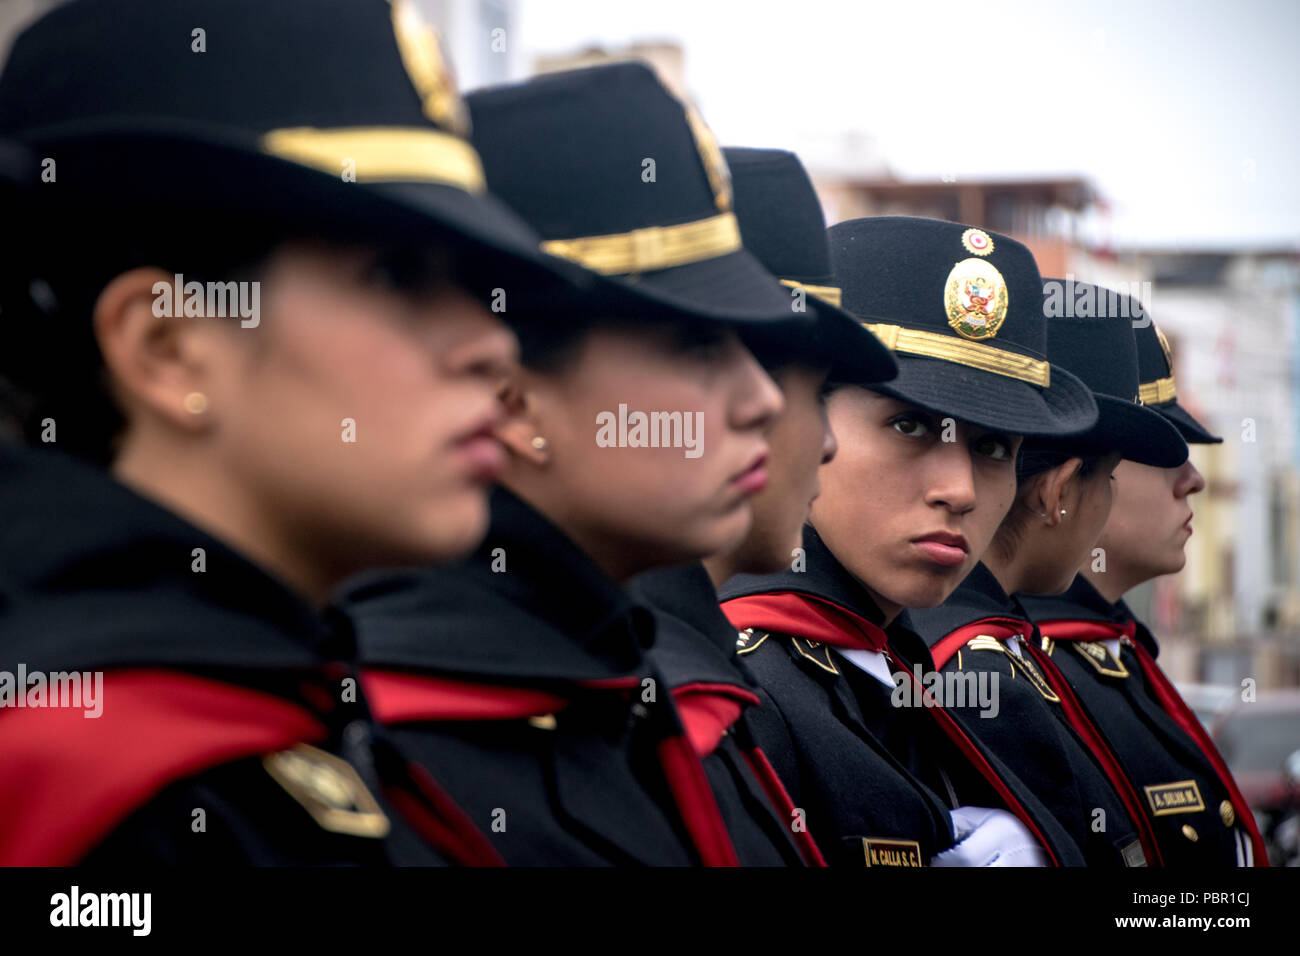 Lima, Lima Region, Peru. 29th July, 2018. Women of Peru's Policia Nacional seen marching.Members of Peru's armed forces, coastguard, search & rescue, and police march in full uniform during the country's Gran Parada Militar. This parade always occurs the day after Peru's Independence Day marking the official end of festivities across the nation. Credit: Jason Sheil/SOPA Images/ZUMA Wire/Alamy Live News Stock Photo